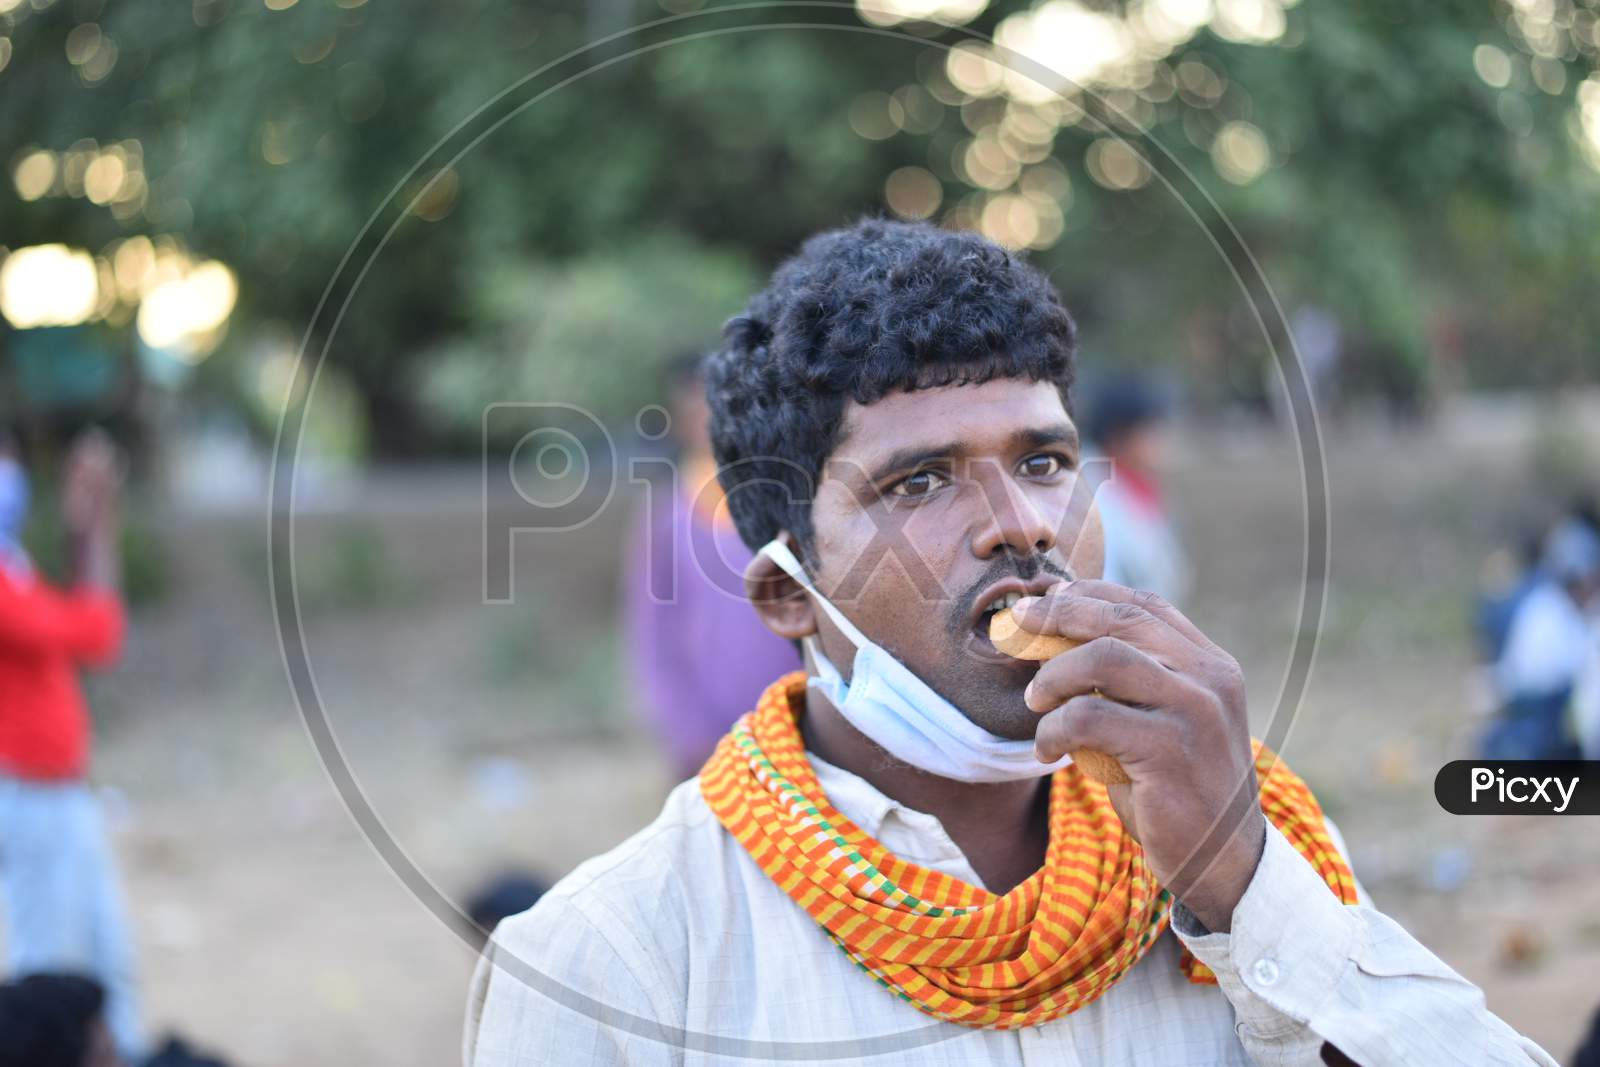 a migrant worker eats a biscuit